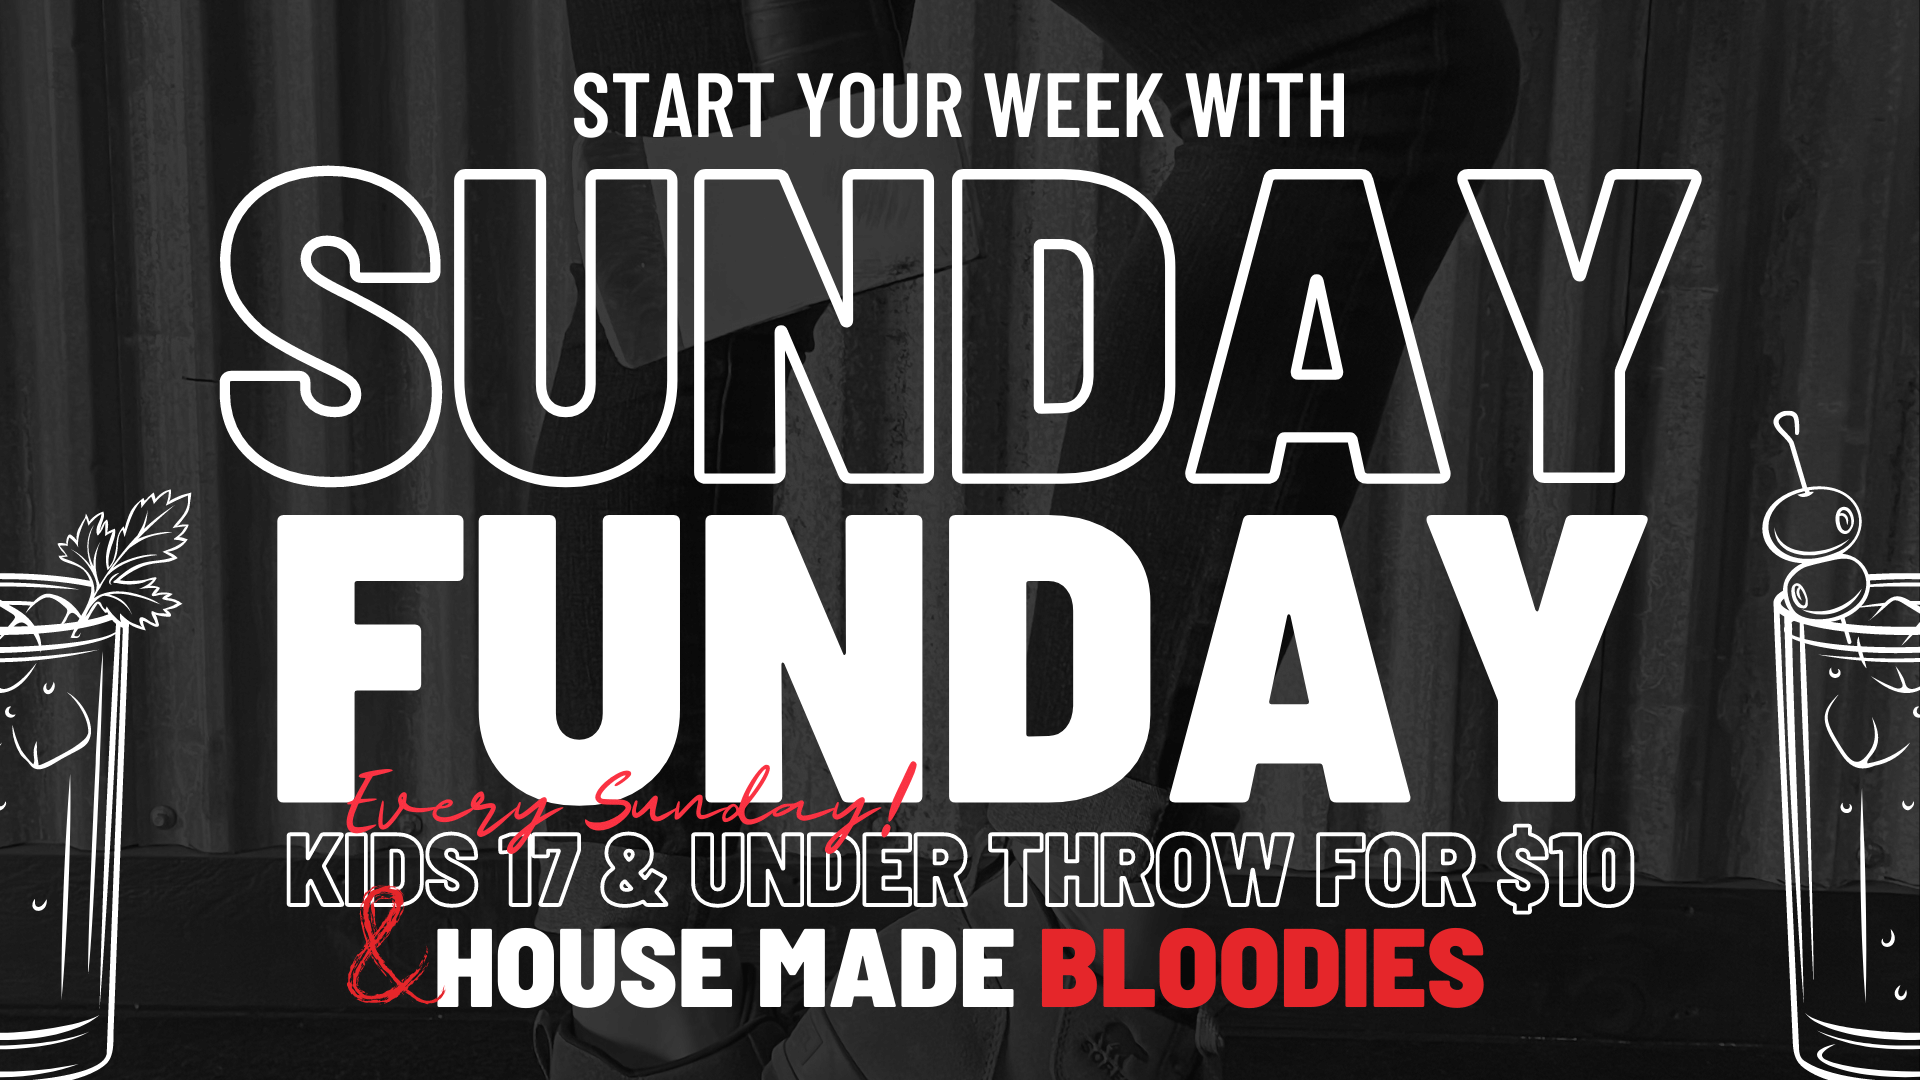 Announcement for everyone to enjoy on Sundays! Start your week with Sunday Funday with the family; kids 17 and under throw for over 50% off! That's only $10 with a paying adult - adults can enjoy house made bloody marys every Sunday as well. See you there!